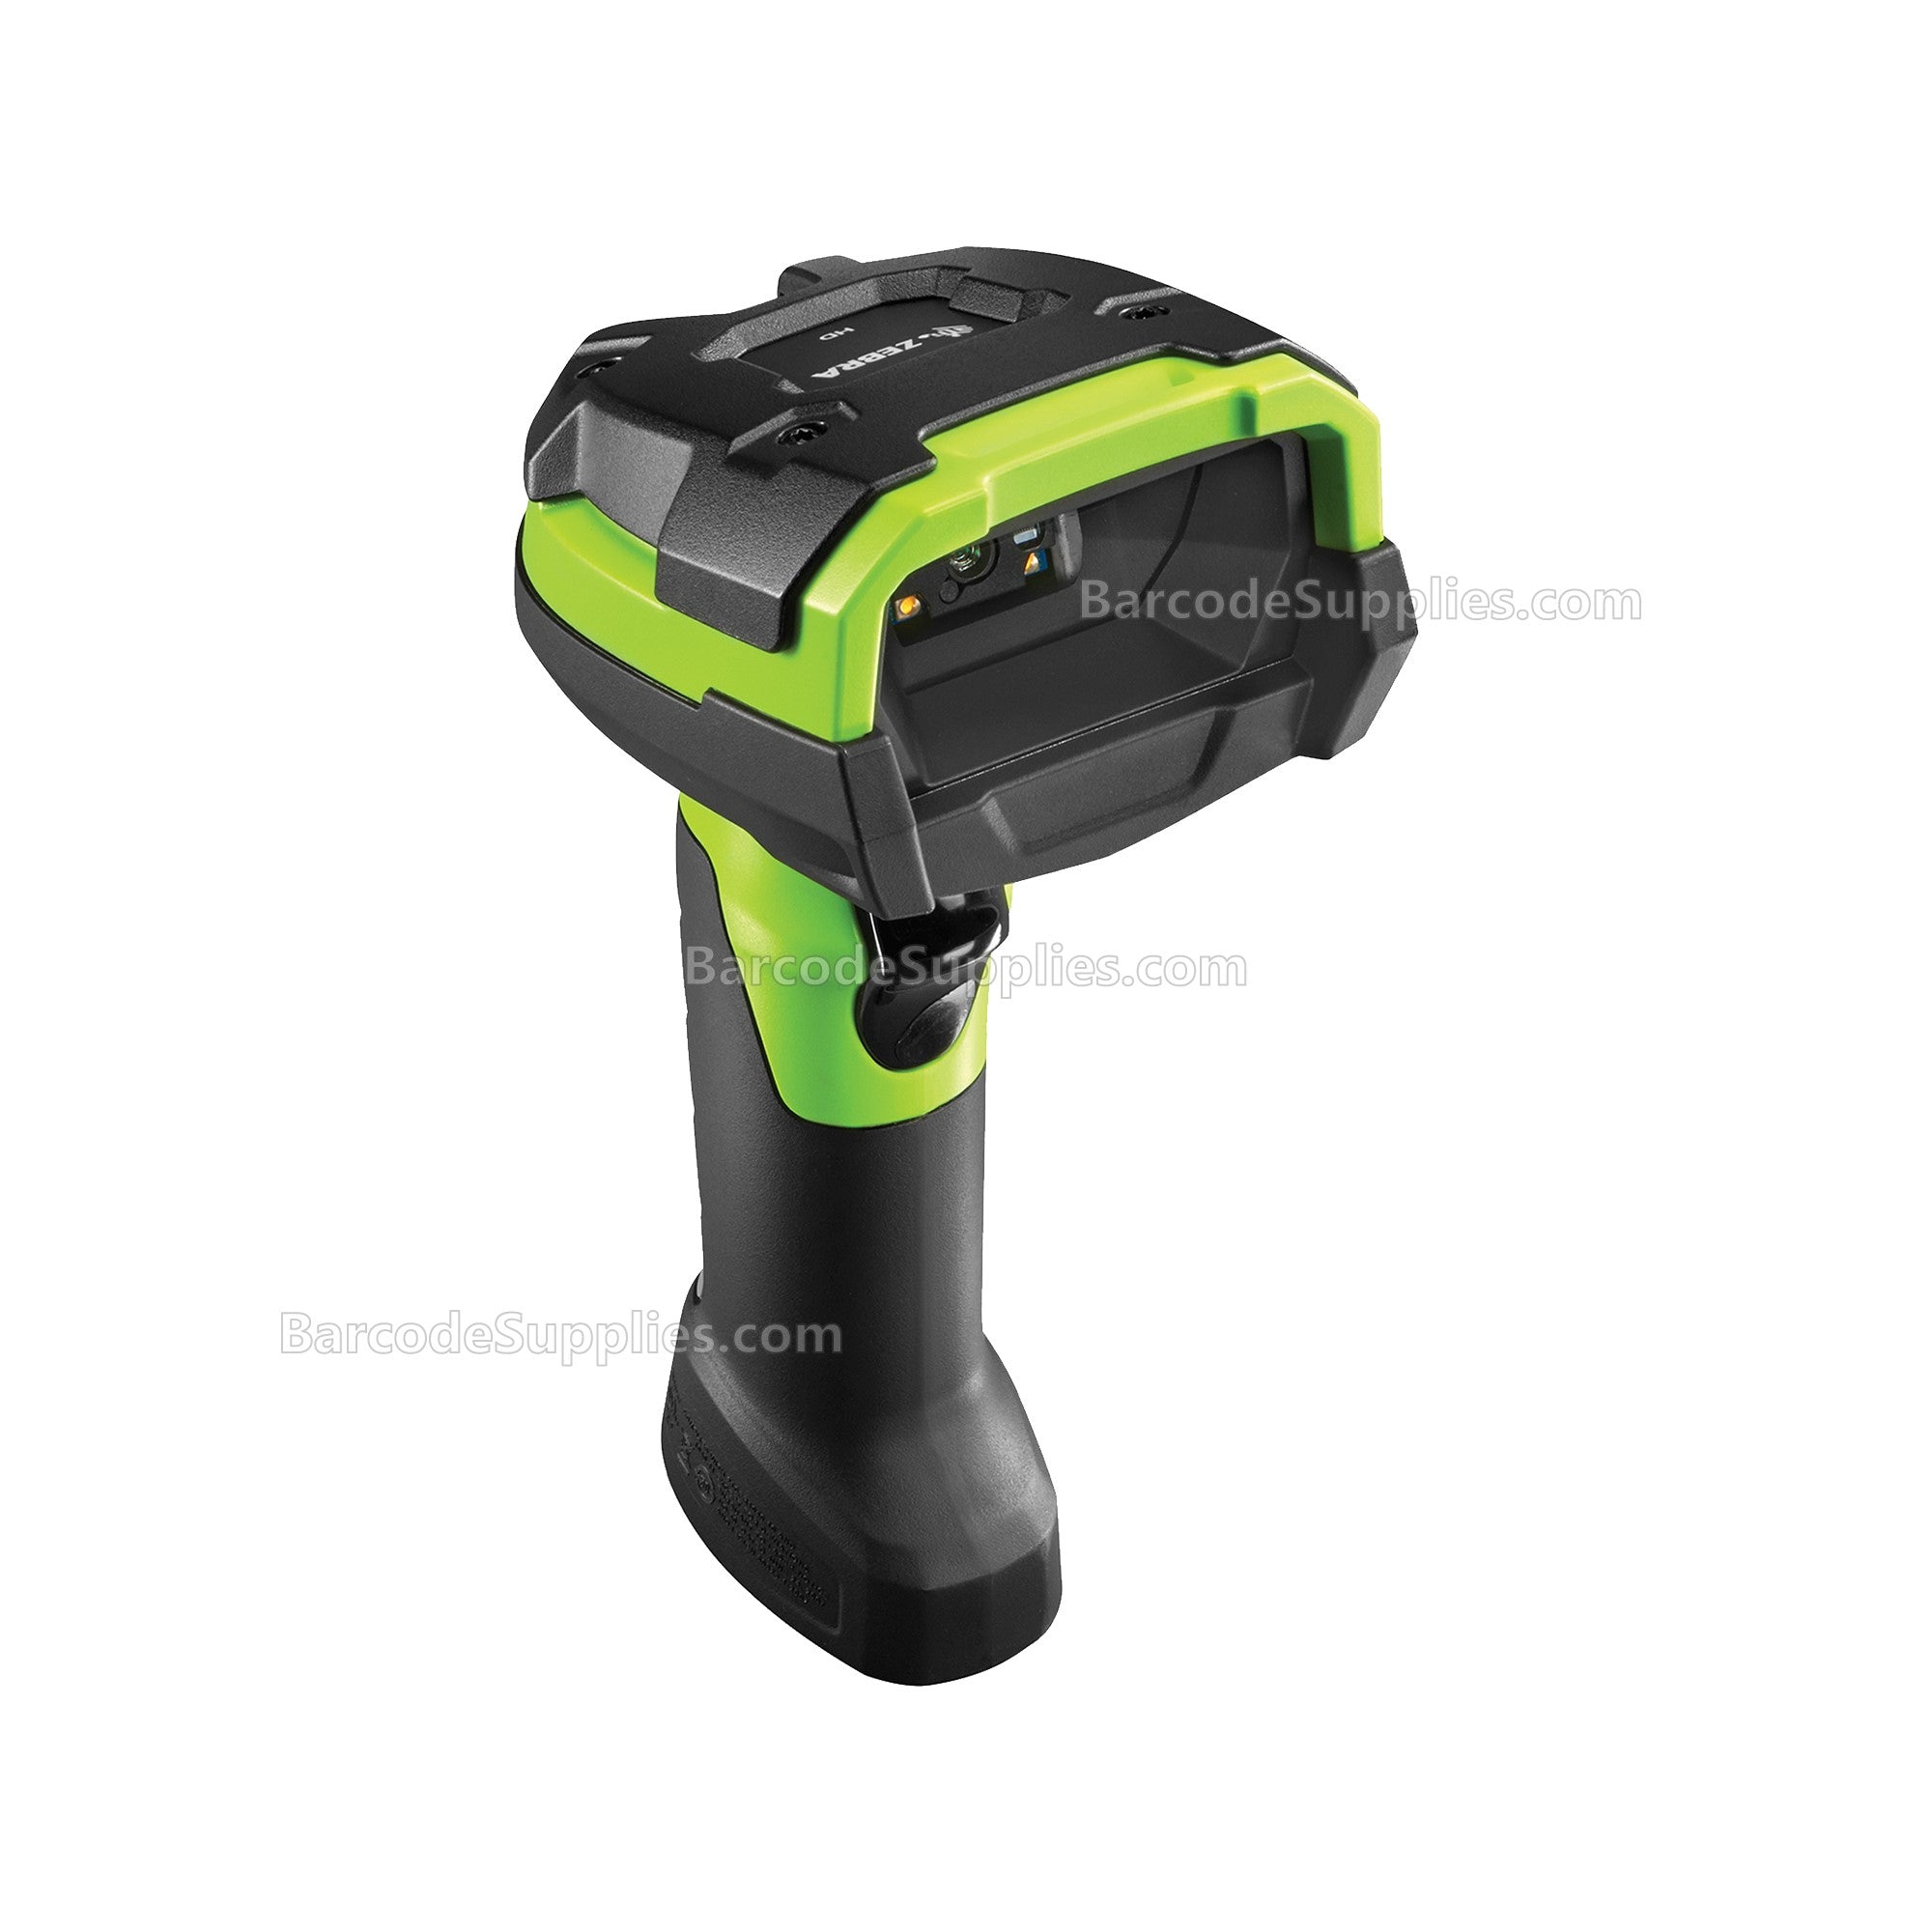 Zebra DS3678-HP Rugged Green Standard Cradle USB Kit: DS3678-HP2F003VZWW Scanner, CBA-U42-S07PAR Shielded USB Cable Supports 12V P/S, STB3678-C100F3WW Cradle, PWR-BGA12V50W0WW, CBL-DC-451A1-01 and 23844-00-00R Line Cords